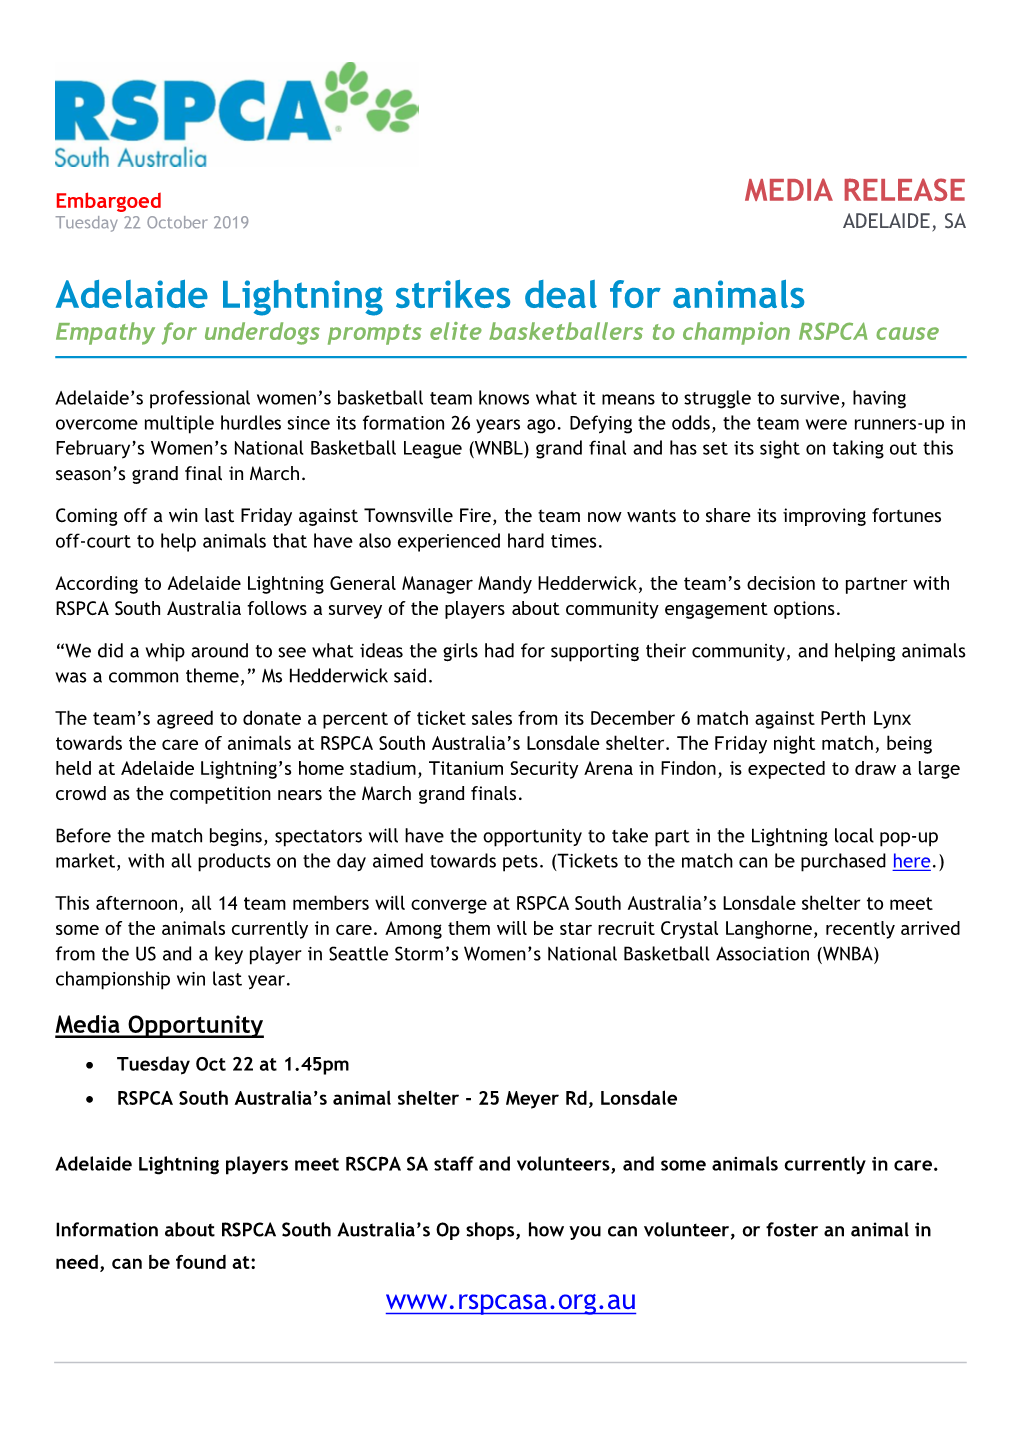 Adelaide Lightning Strikes Deal for Animals Empathy for Underdogs Prompts Elite Basketballers to Champion RSPCA Cause